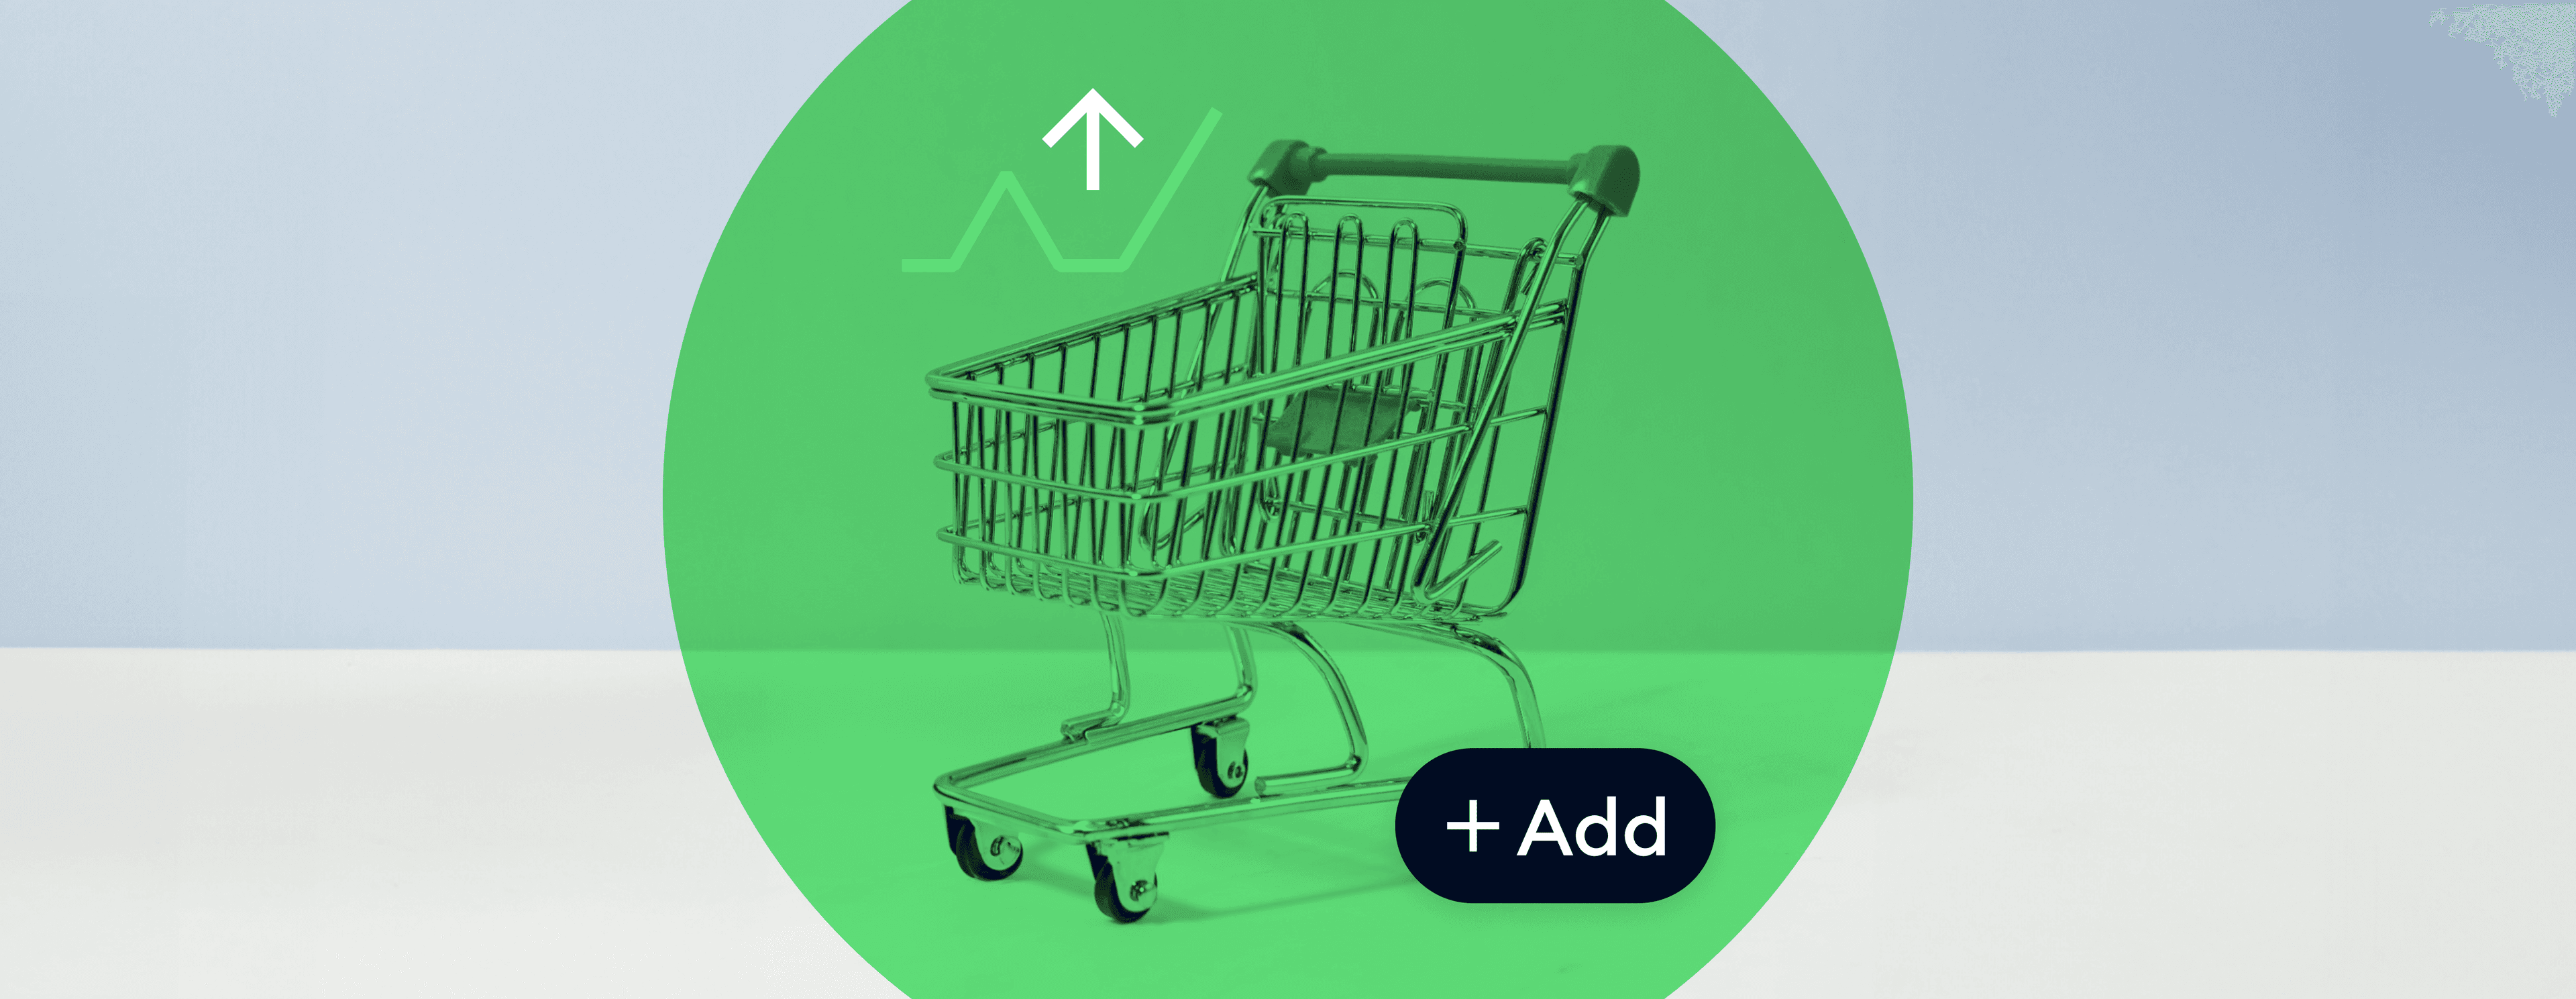 Add-to-Cart Conversion Rate Statistics cover image